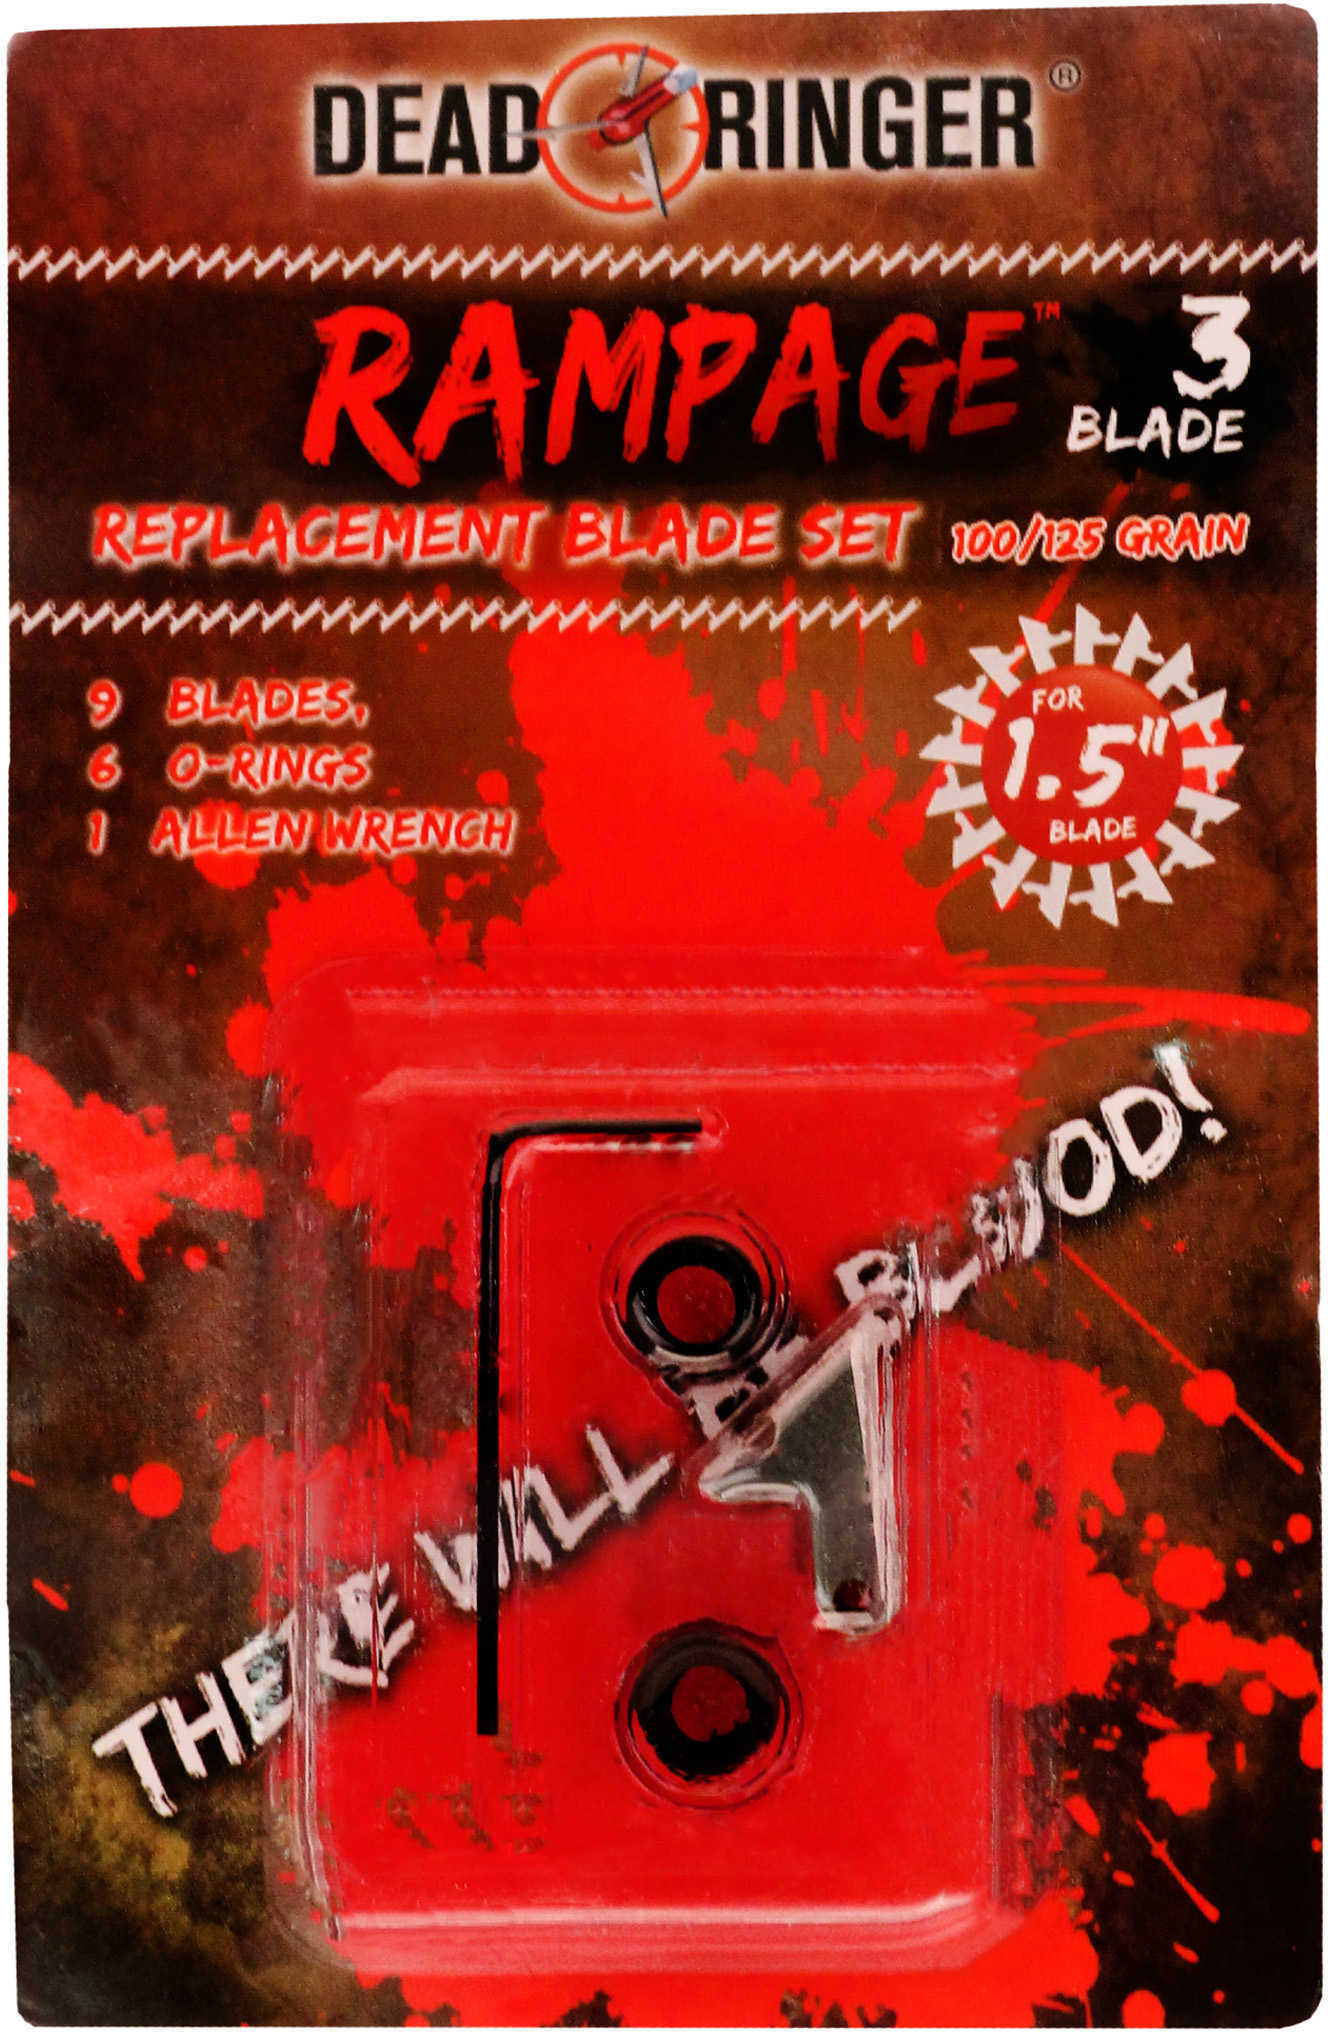 Dead Ringer Replacement BLADES Rampage-3 100/125 Grains 1 1/2" Cut